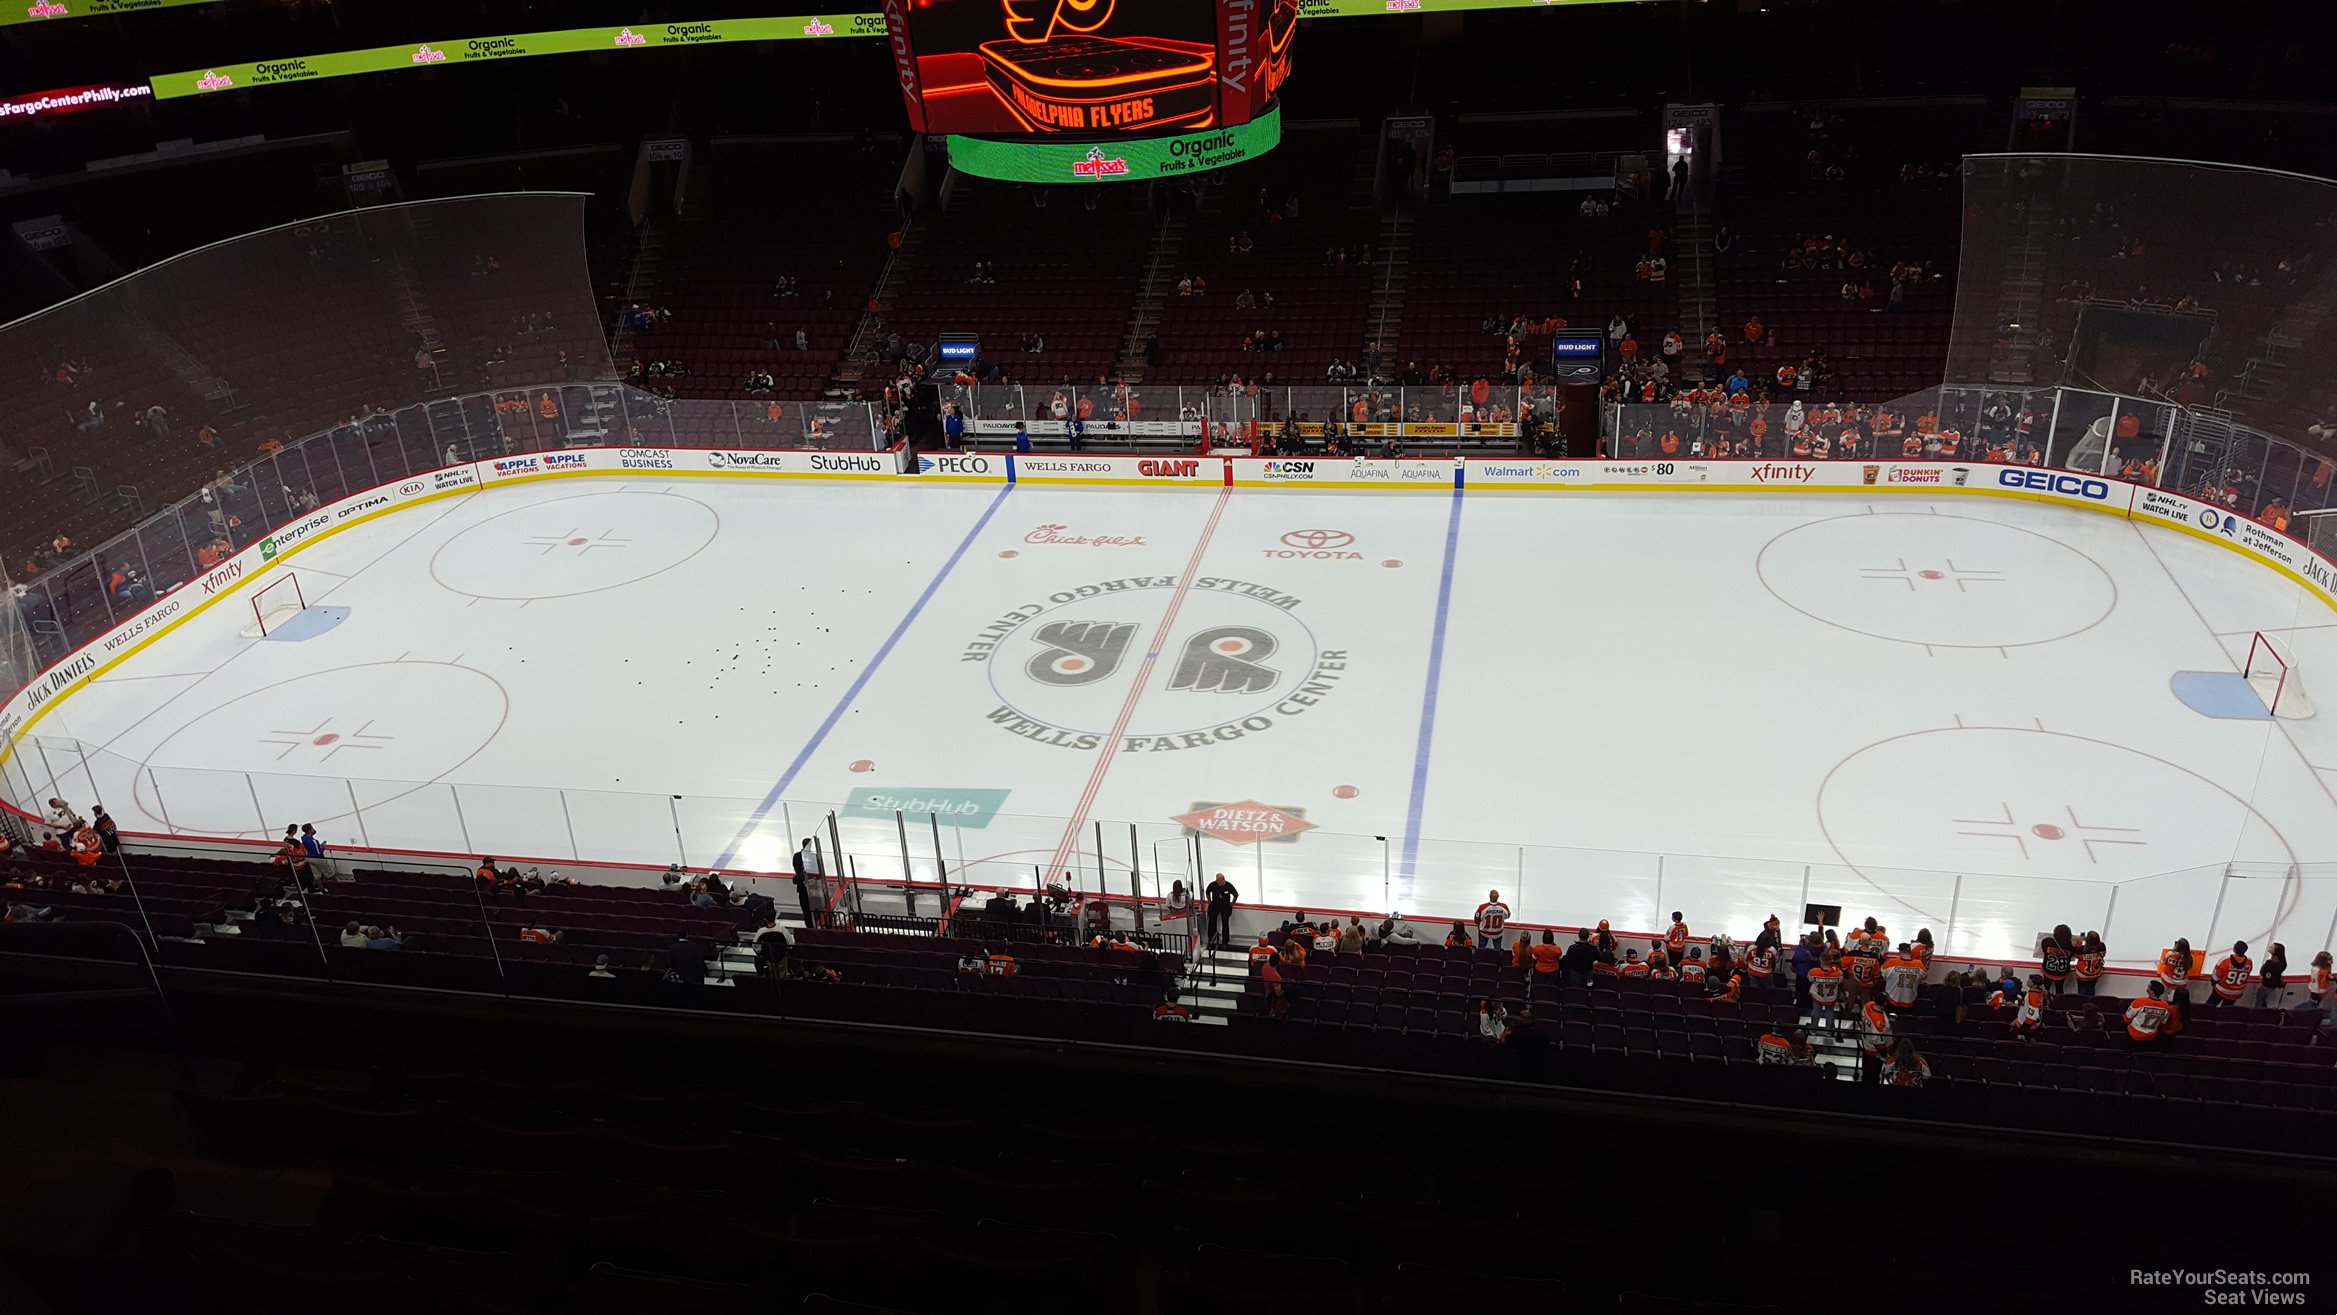 section 214, row 8 seat view  for hockey - wells fargo center